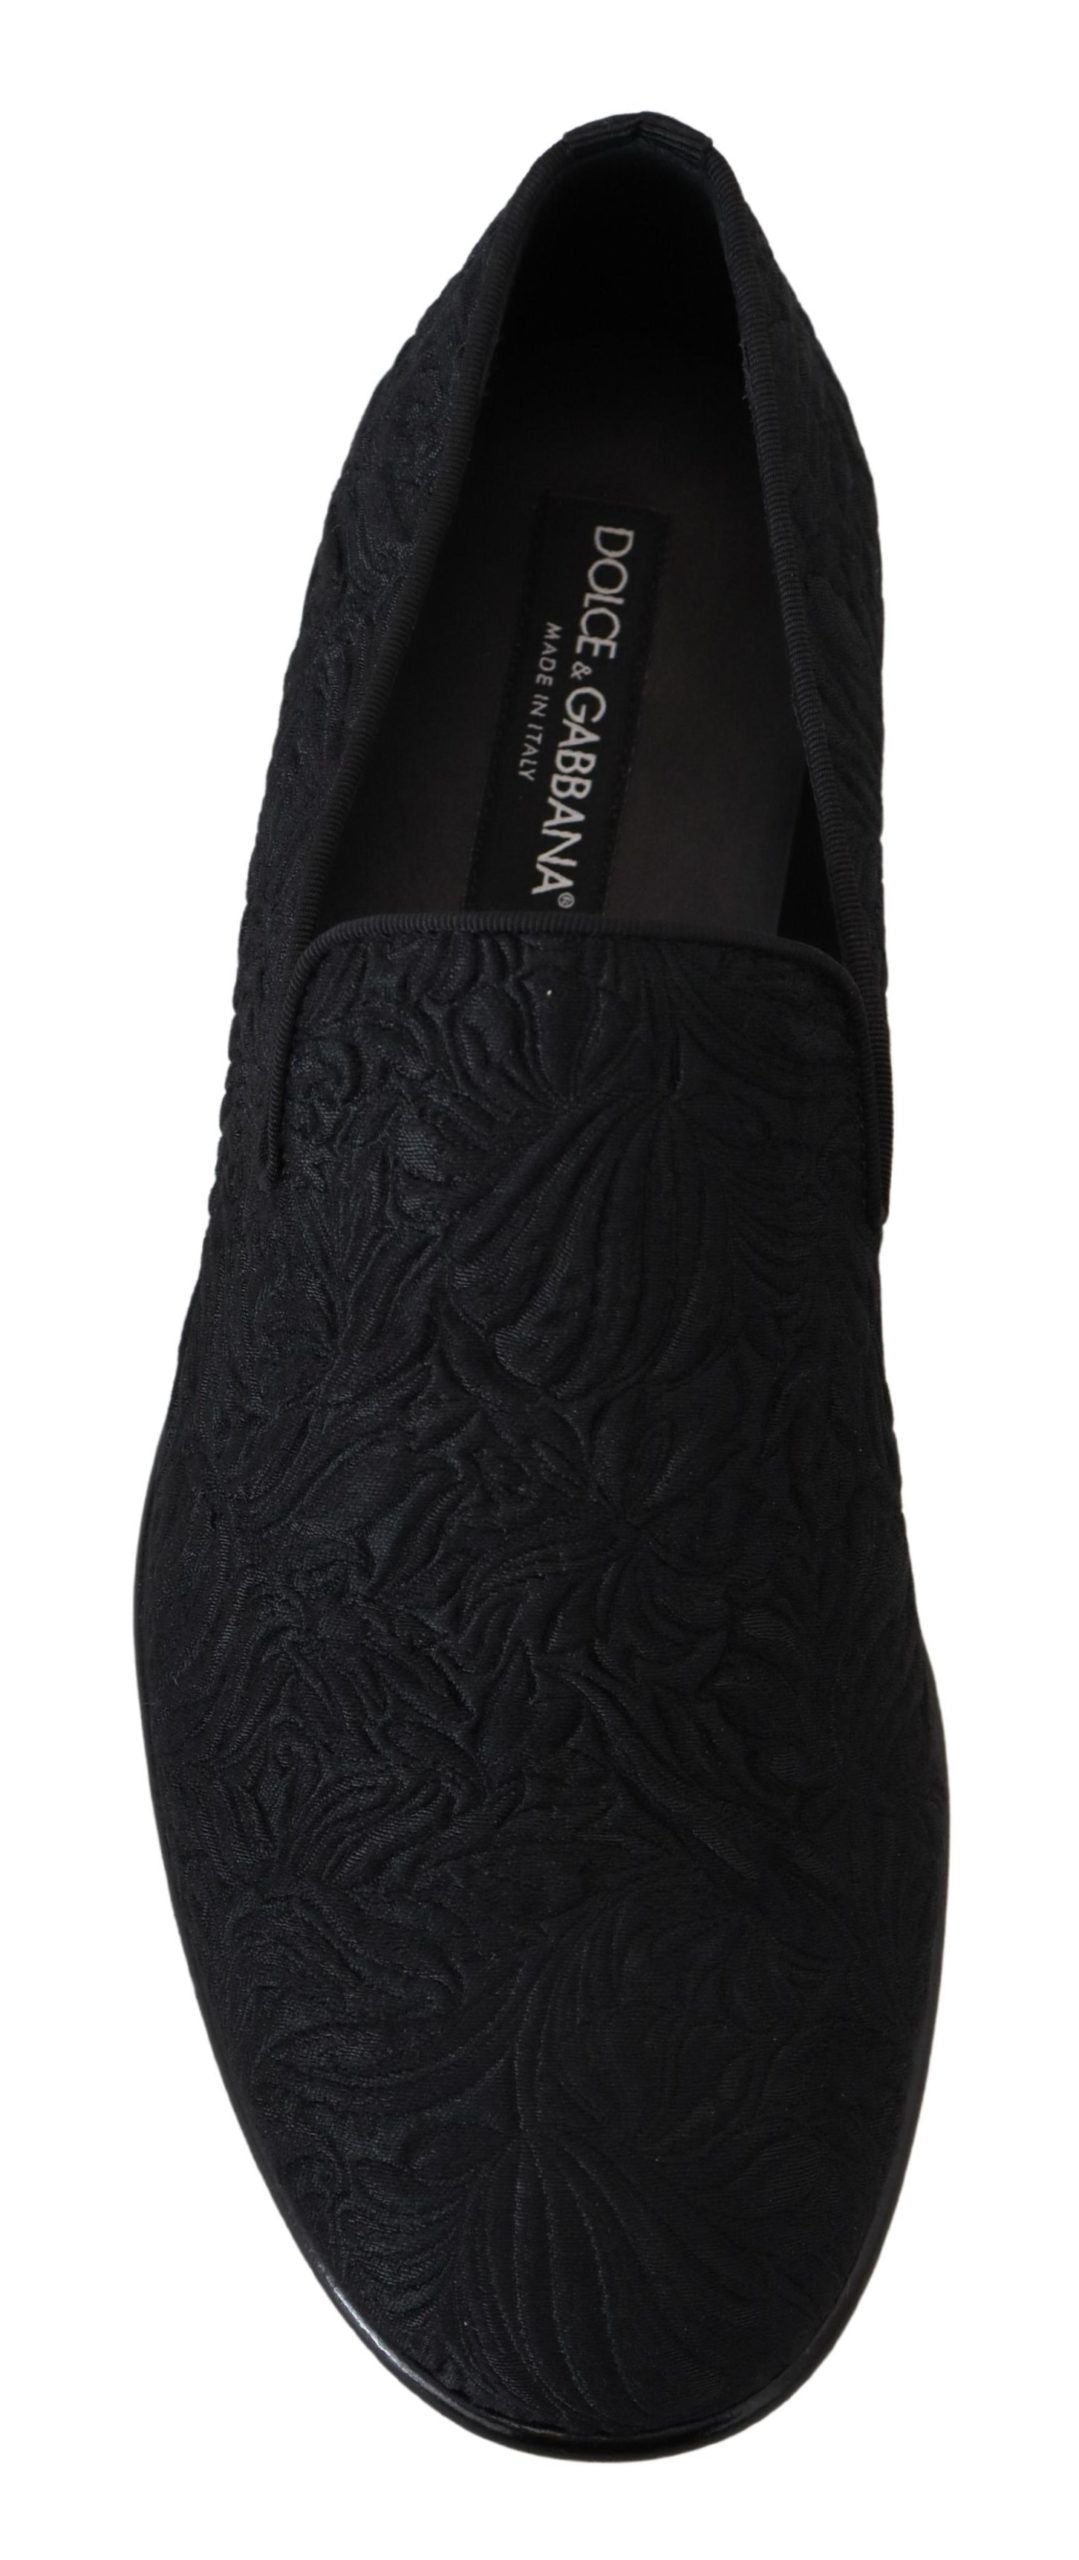 Dolce & Gabbana Black Floral Jacquard Slippers Loafers Shoes